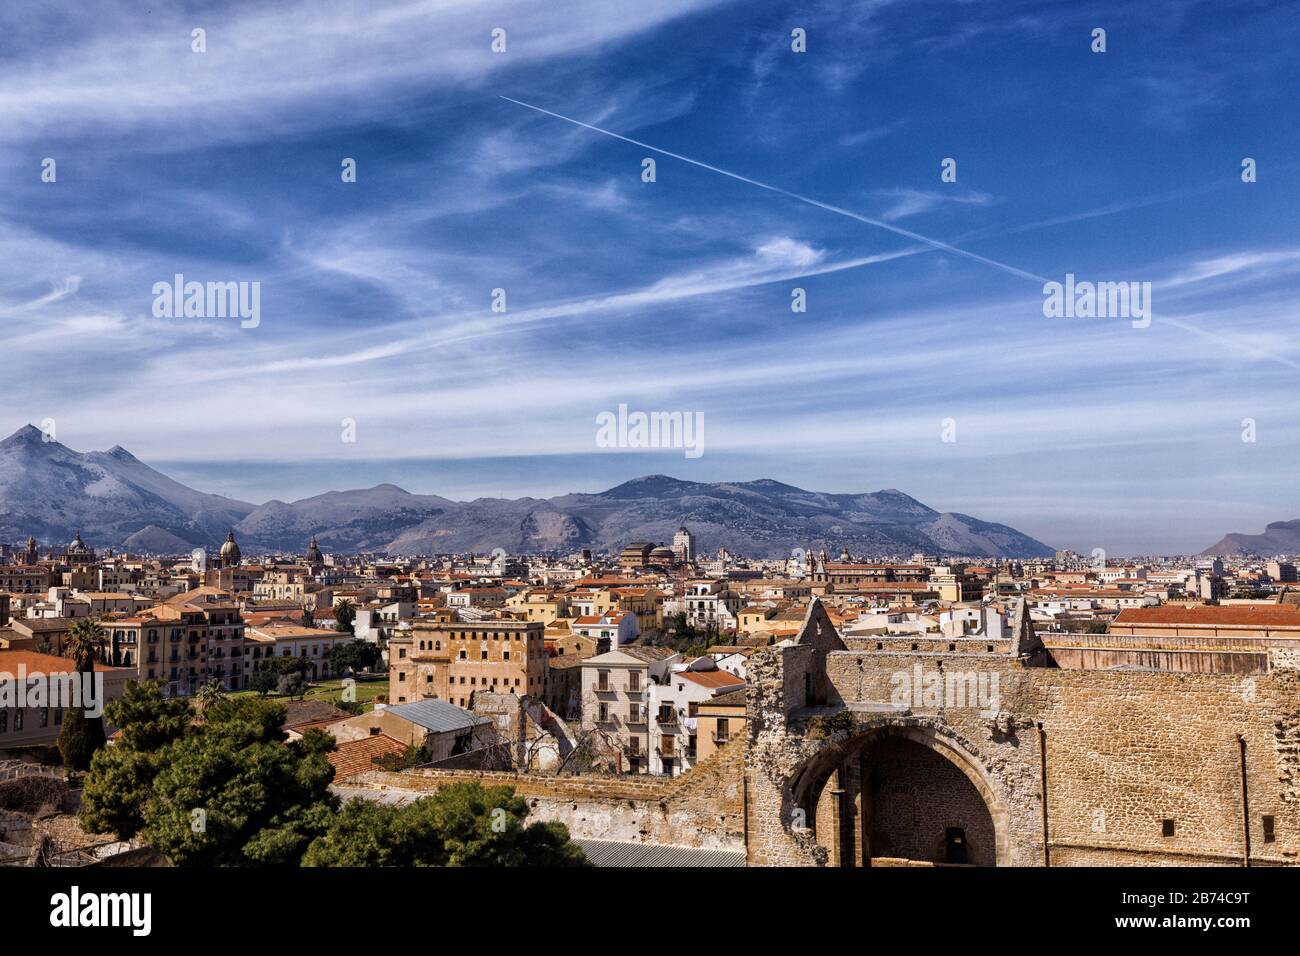 Geoengineering, chemtrails, weather control, HAARP, man-made cloud formations above Palermo city, Sicily, March 2020 Stock Photo